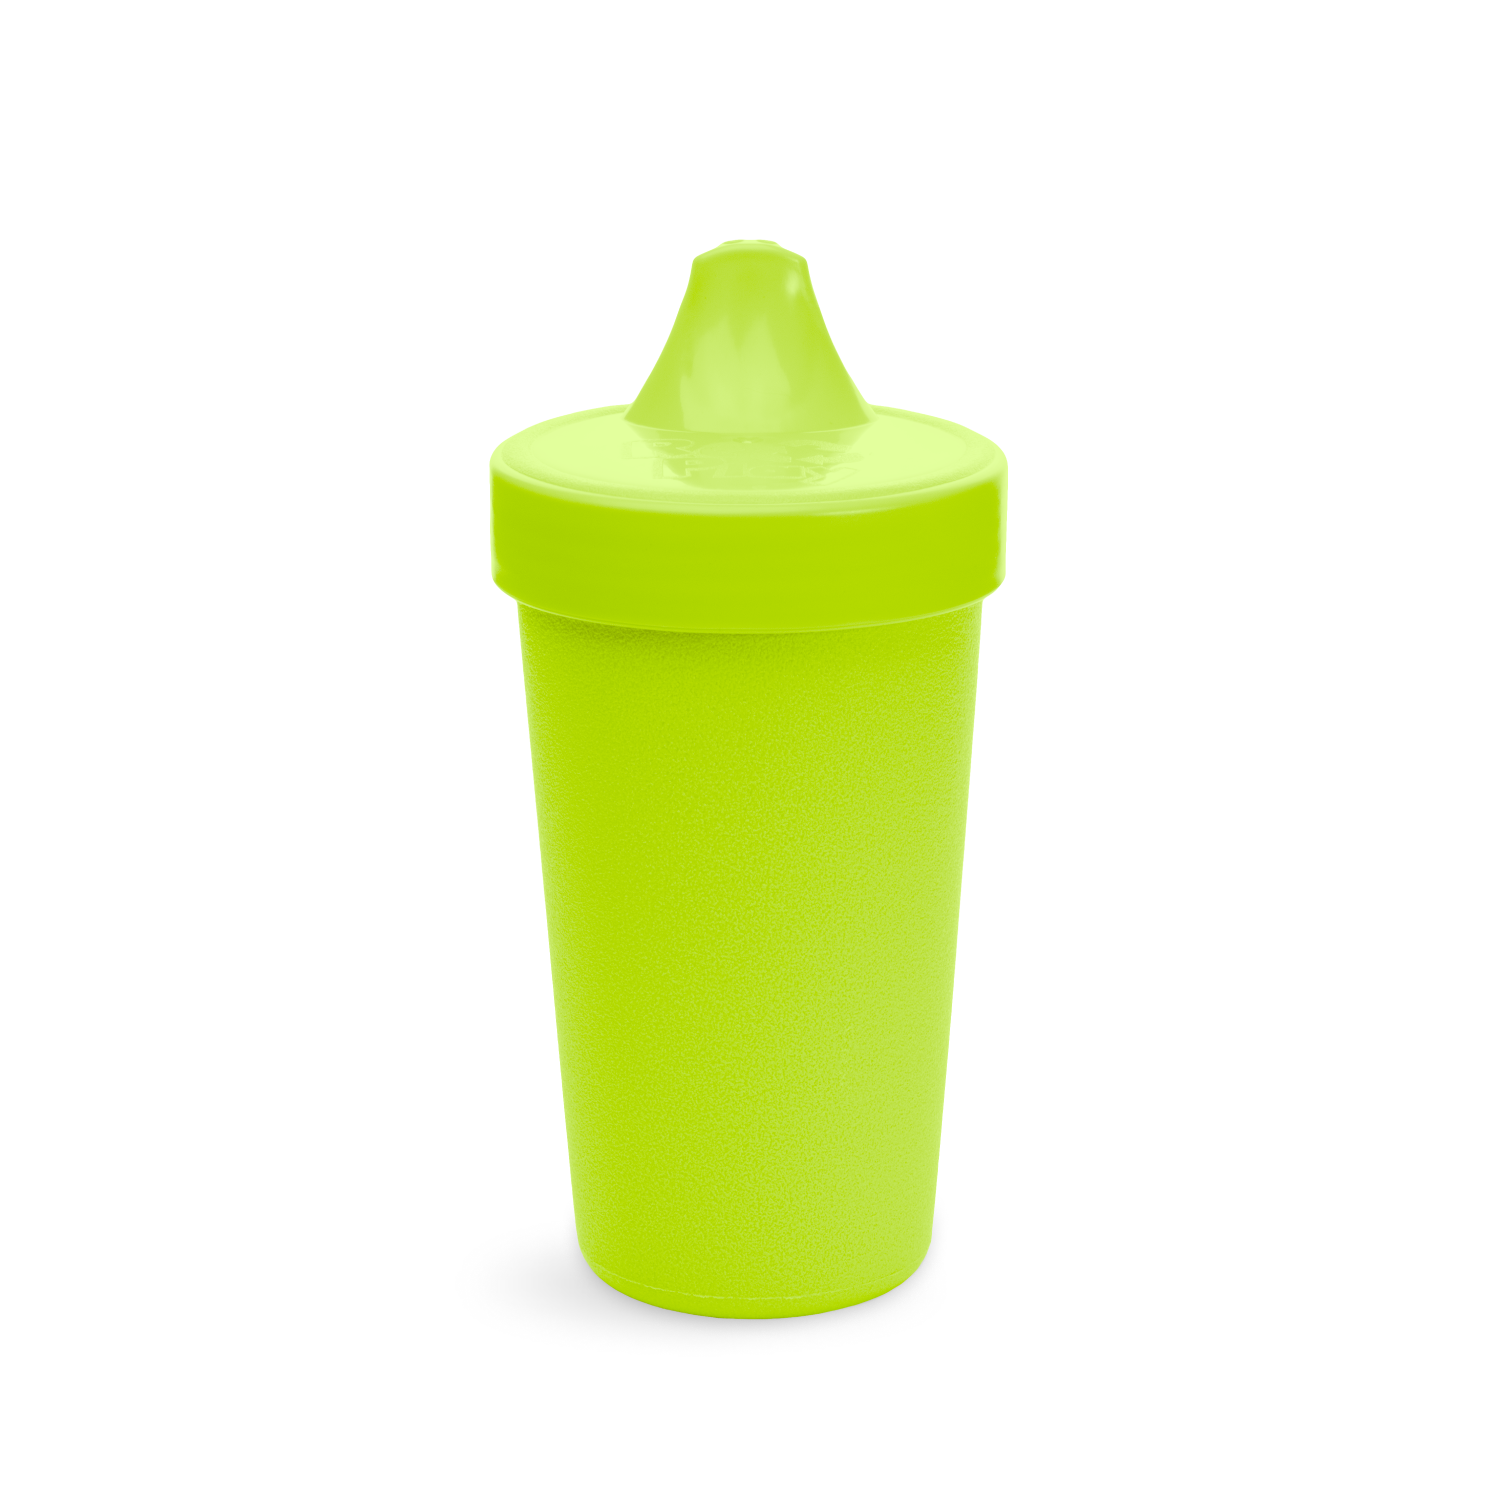 Re-Play Toddler Tableware - No Spill Cups – Crunch Natural Parenting